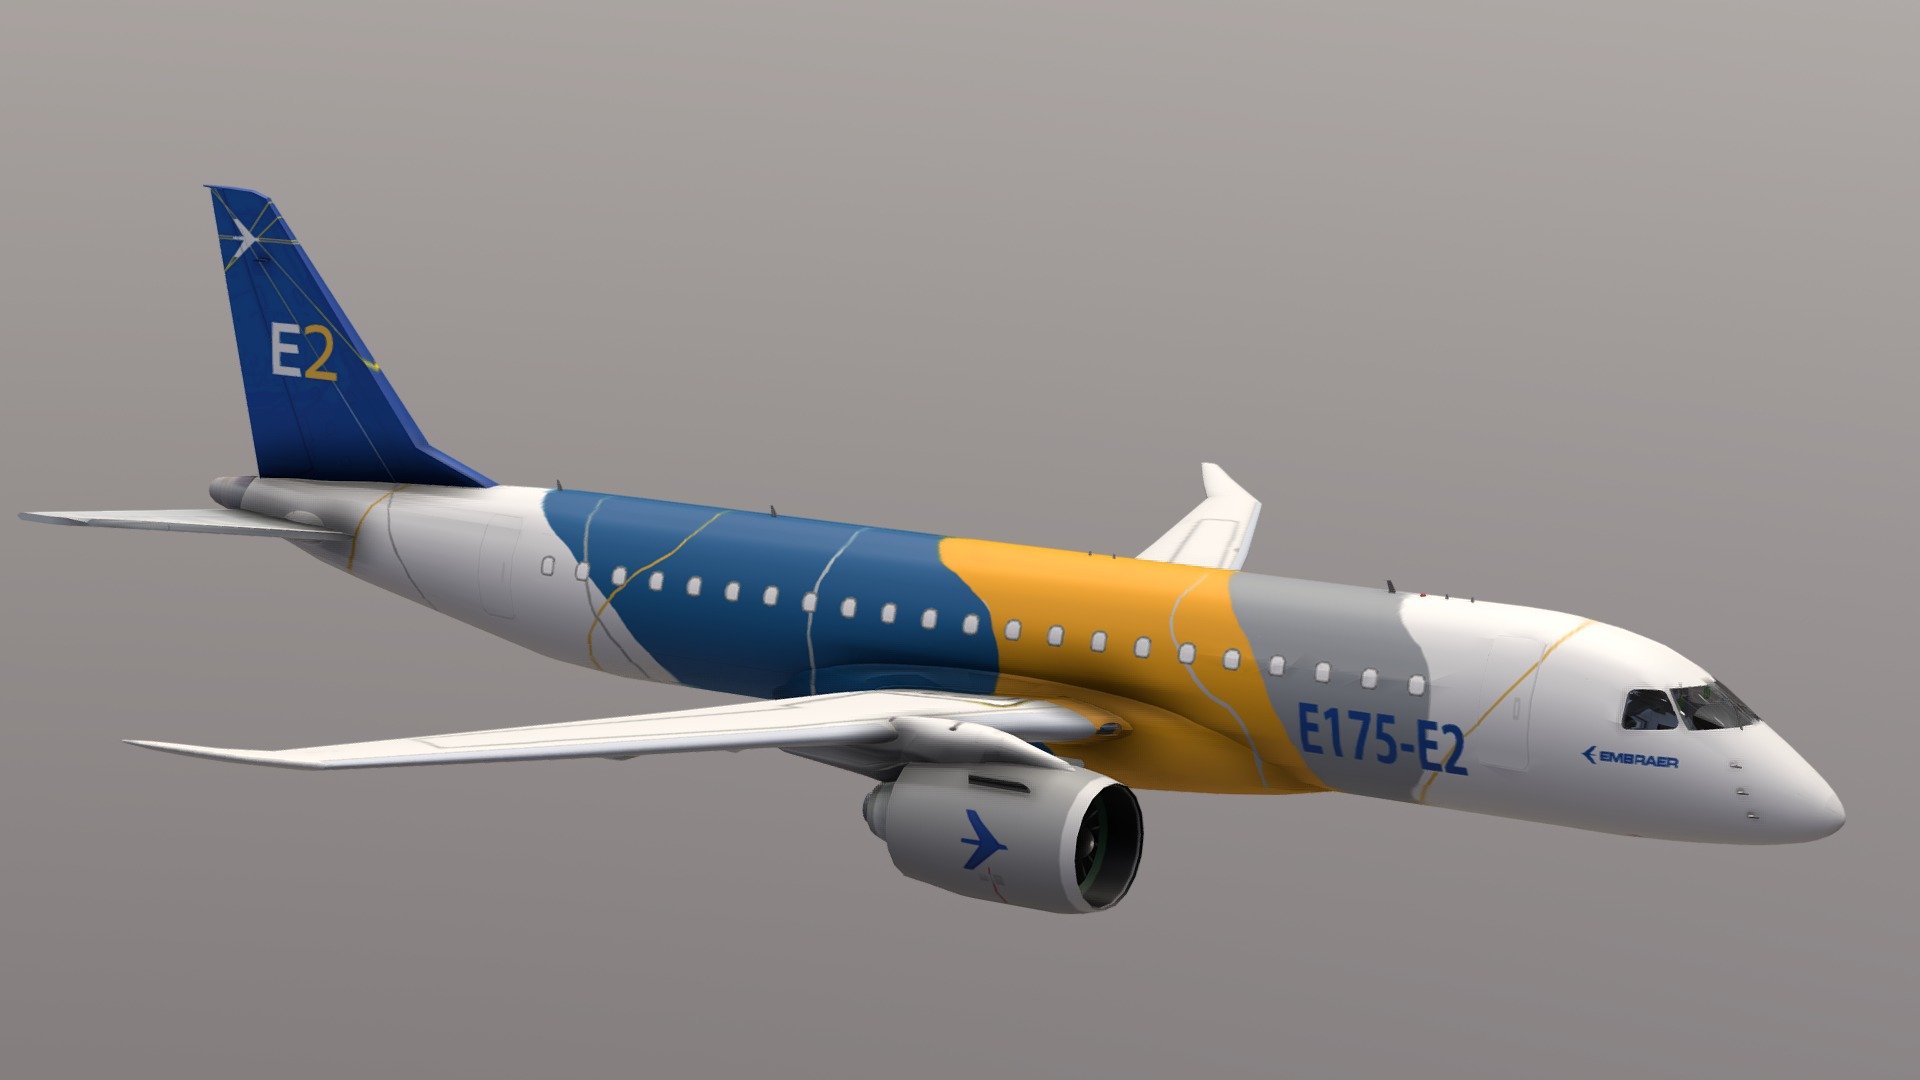 Program of the new generation of Embraer E175-E2 was postponed for three years